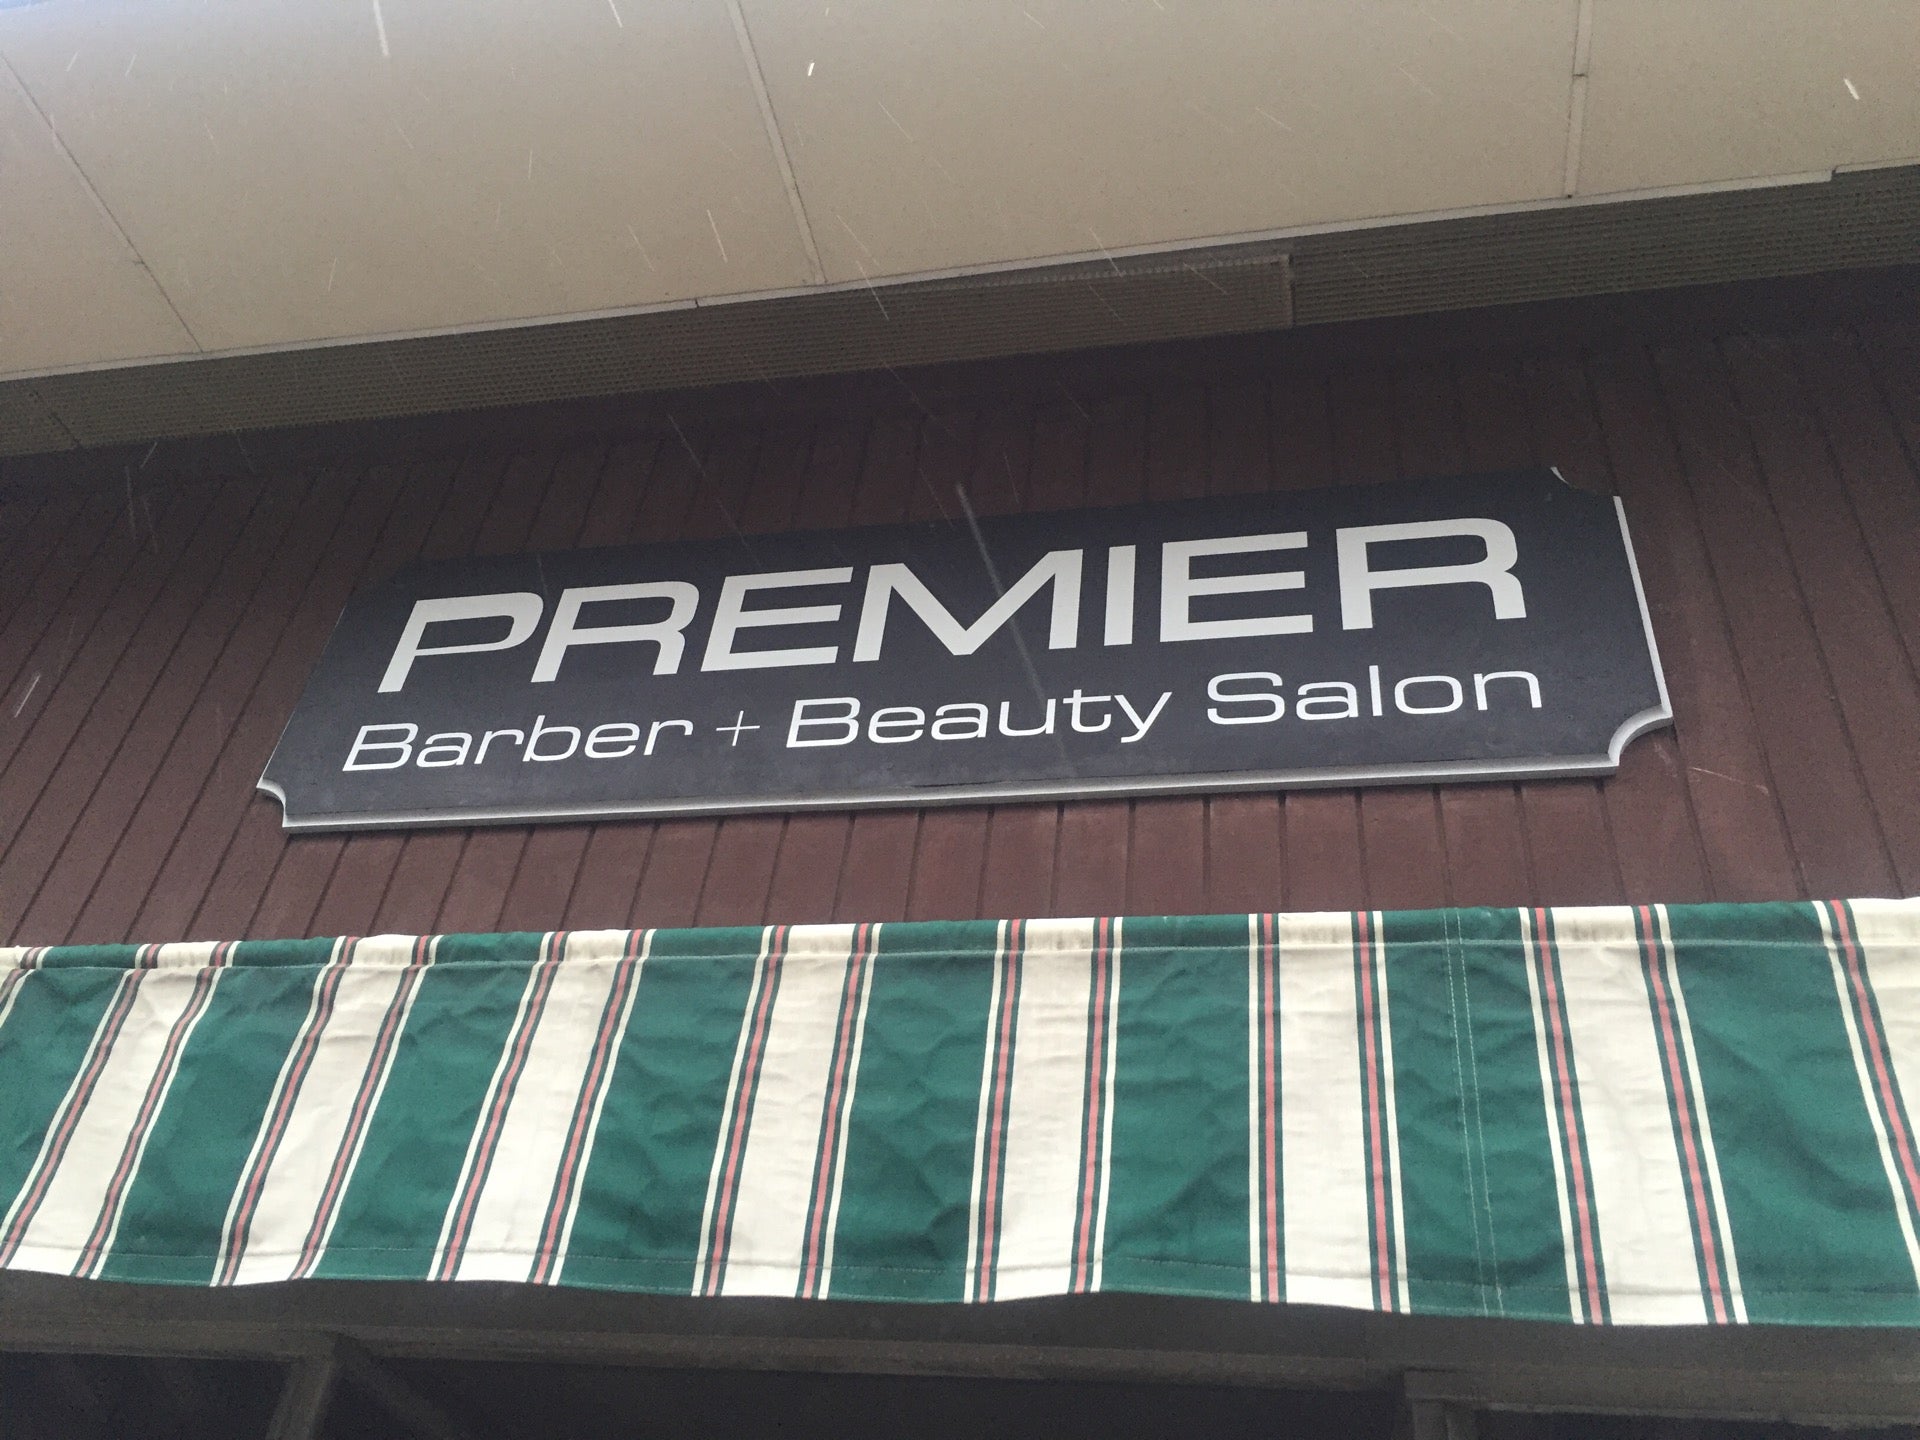 Premier Barbershop 20 High St, Mt Holly New Jersey 08060